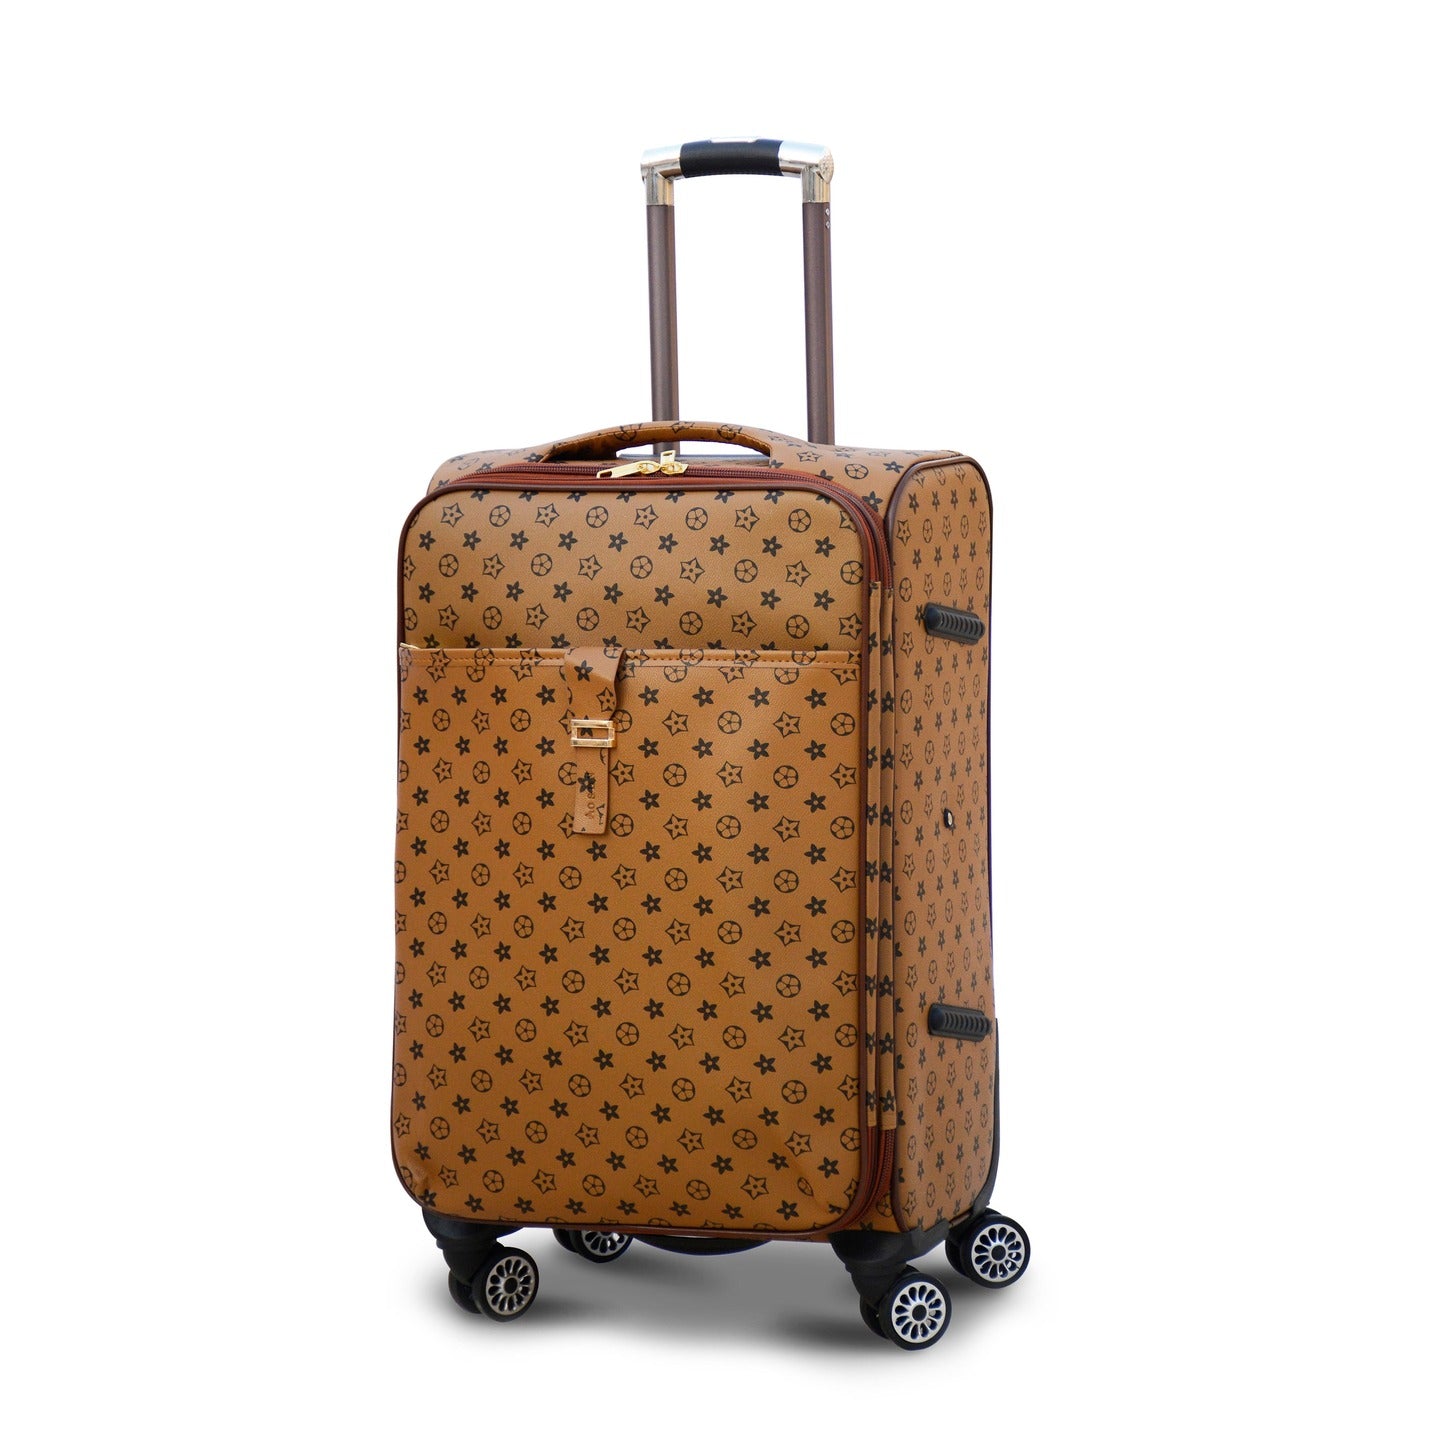 24" Light Brown Colour LVR PU Leather Luggage Lightweight Trolley Bag with Spinner Wheel